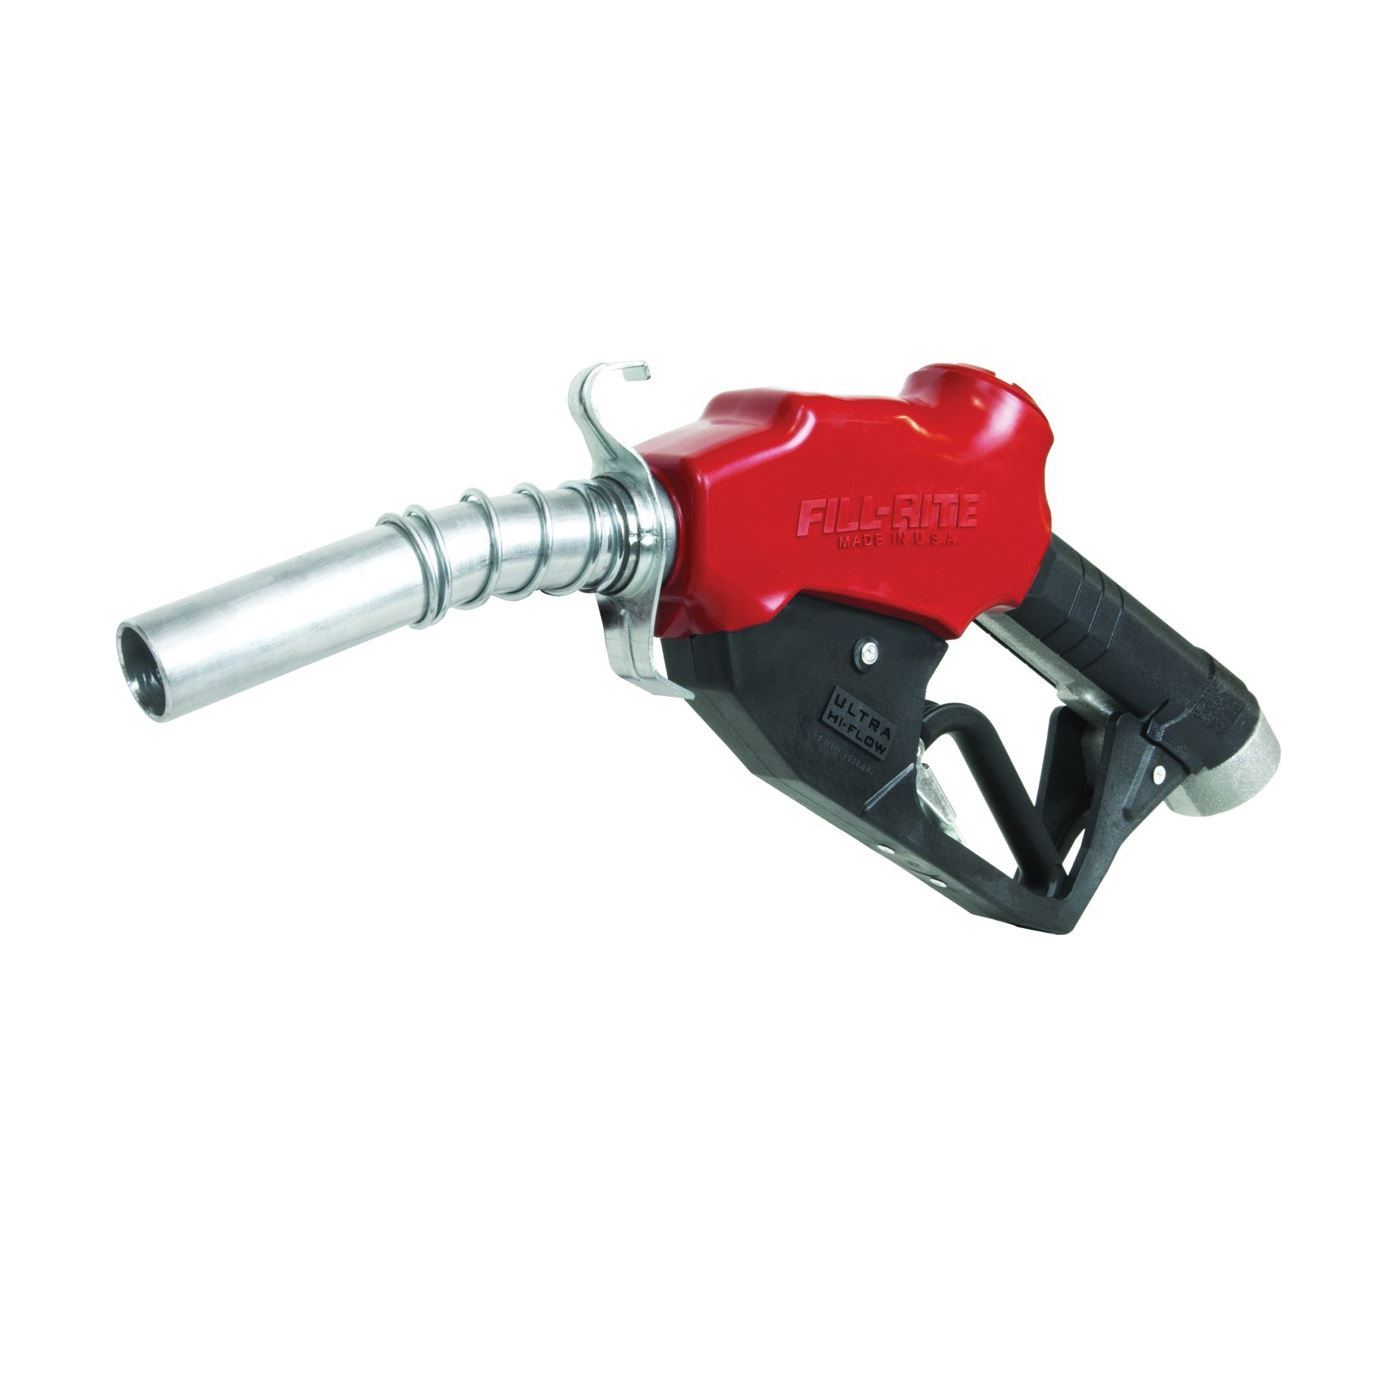 Fill-Rite N100DAU13 Ultra High Flow Automatic Nozzle 1" Length for sale online 